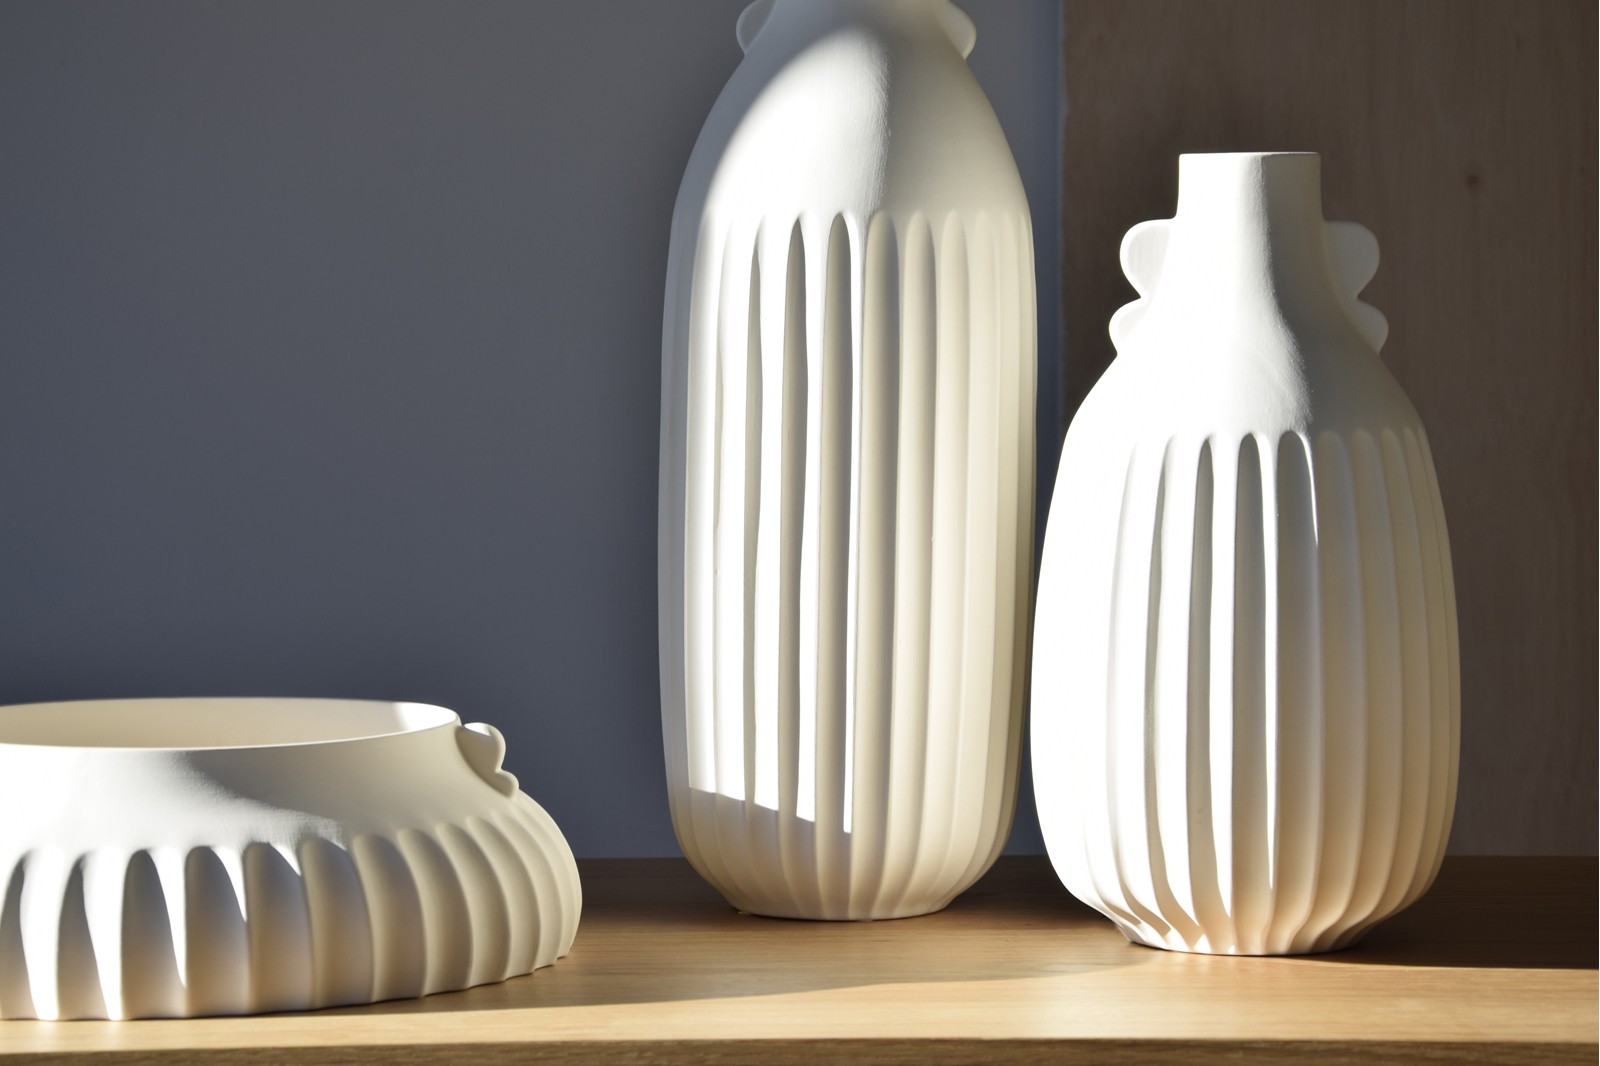 CLOUD COLLECTION: CERAMIC VASES AND CENTERPIECE